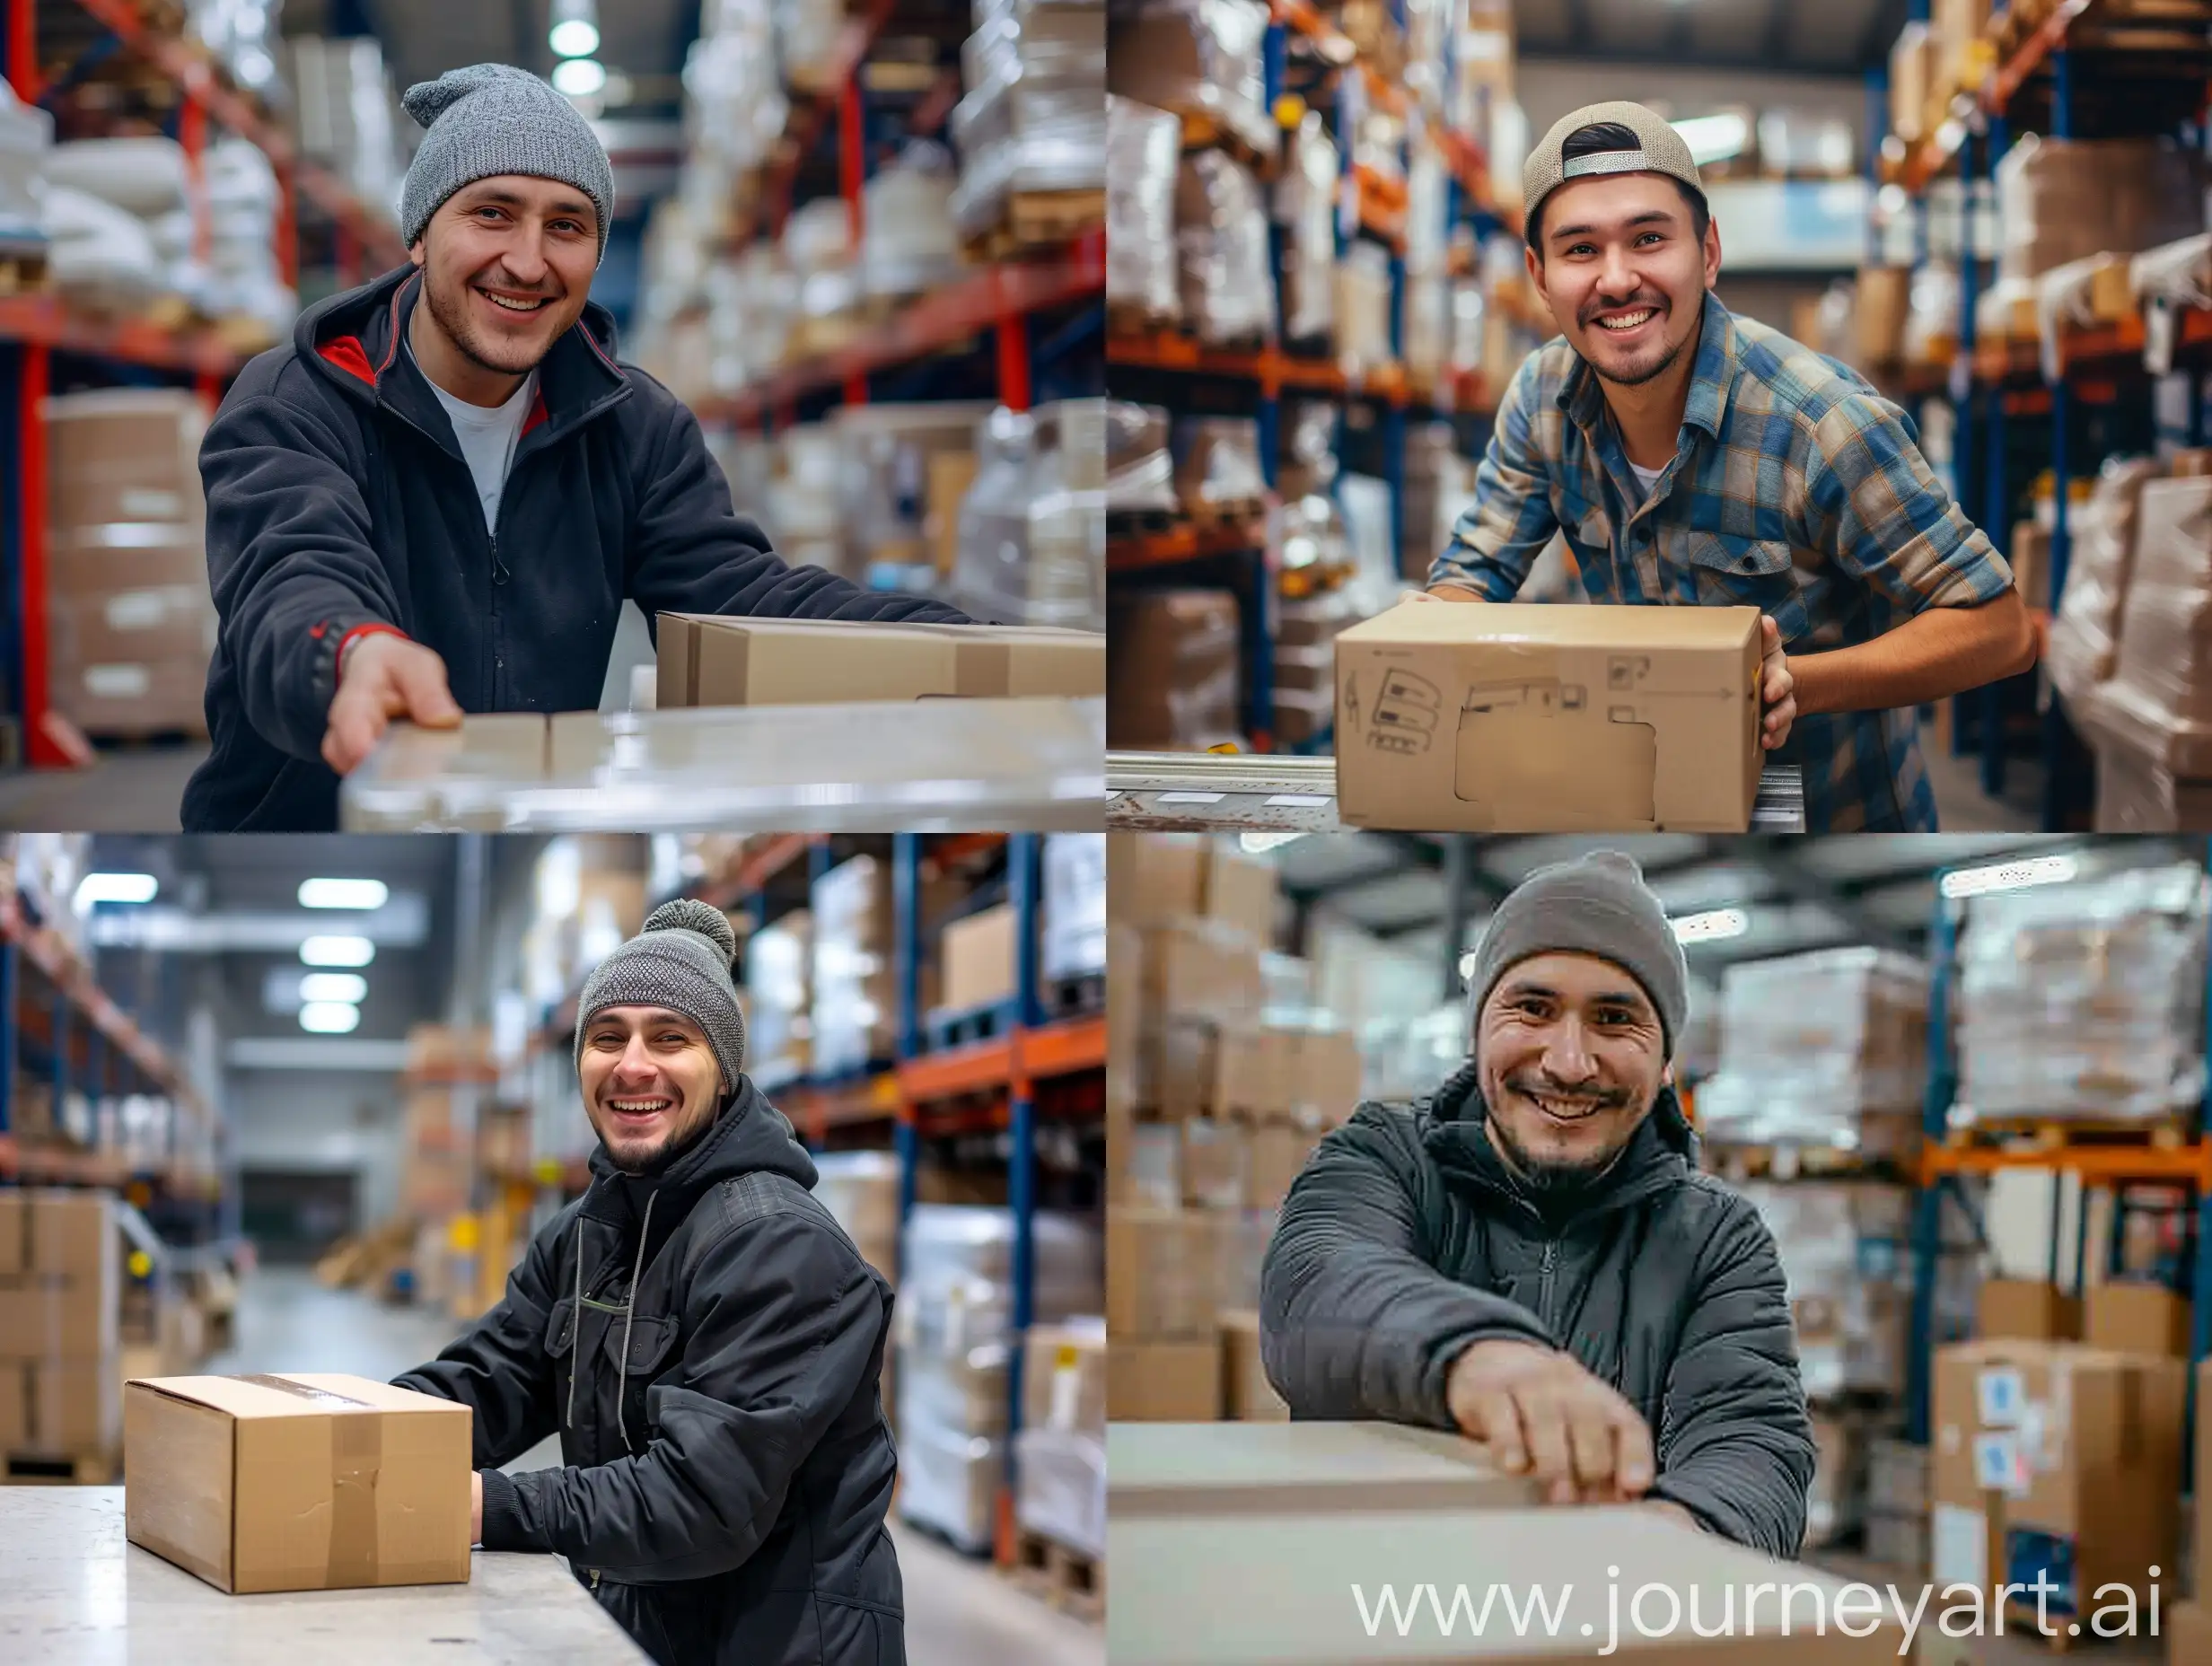 Smiling-Slavic-Warehouse-Worker-Places-Box-on-Table-in-Warehouse